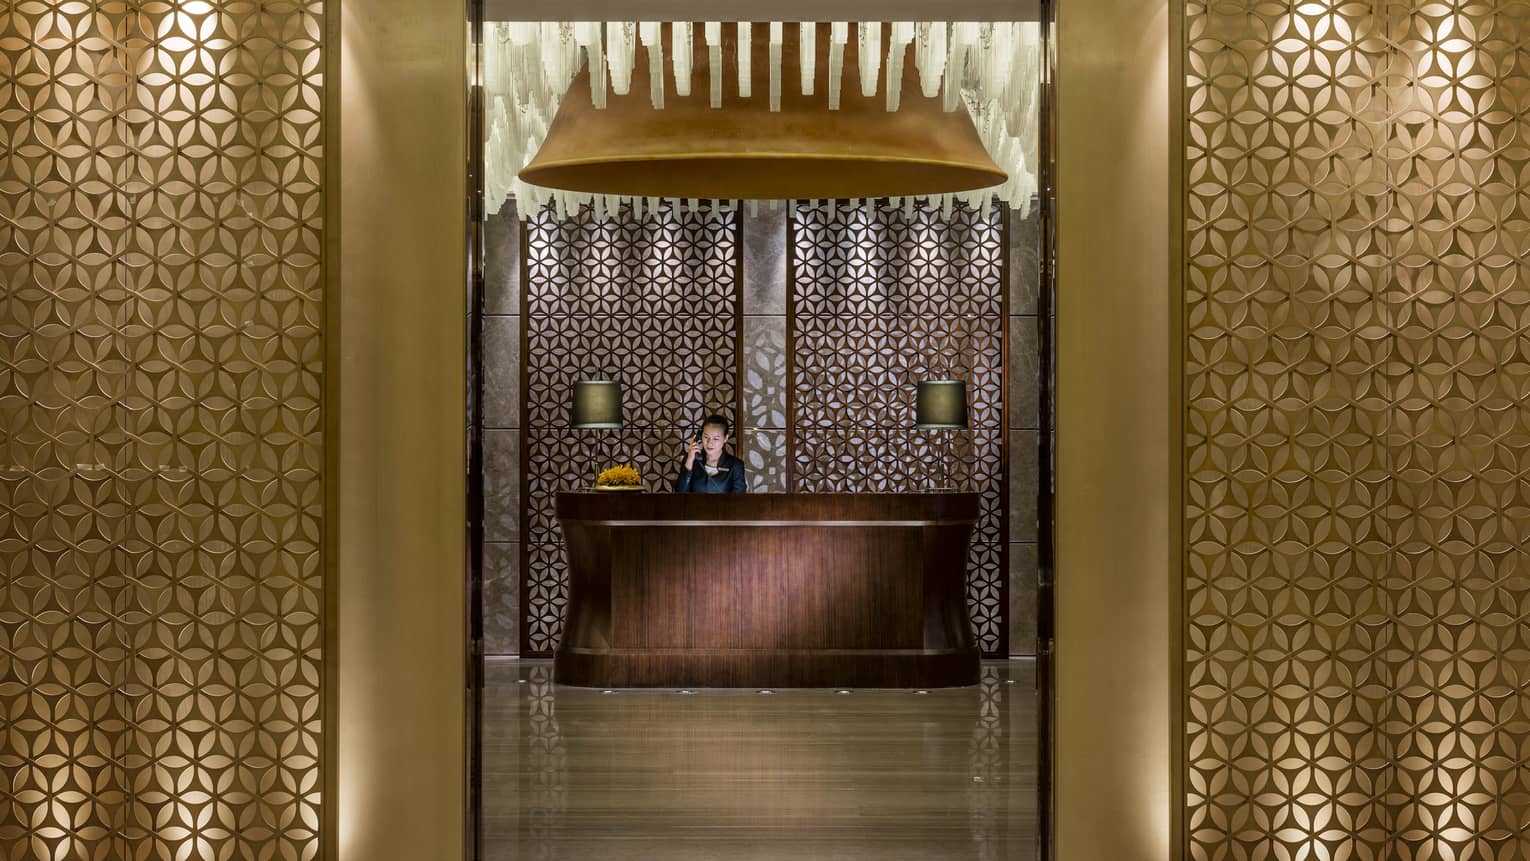 Decorative gold screens to hall where woman answers phone at wood reception desk with lamps